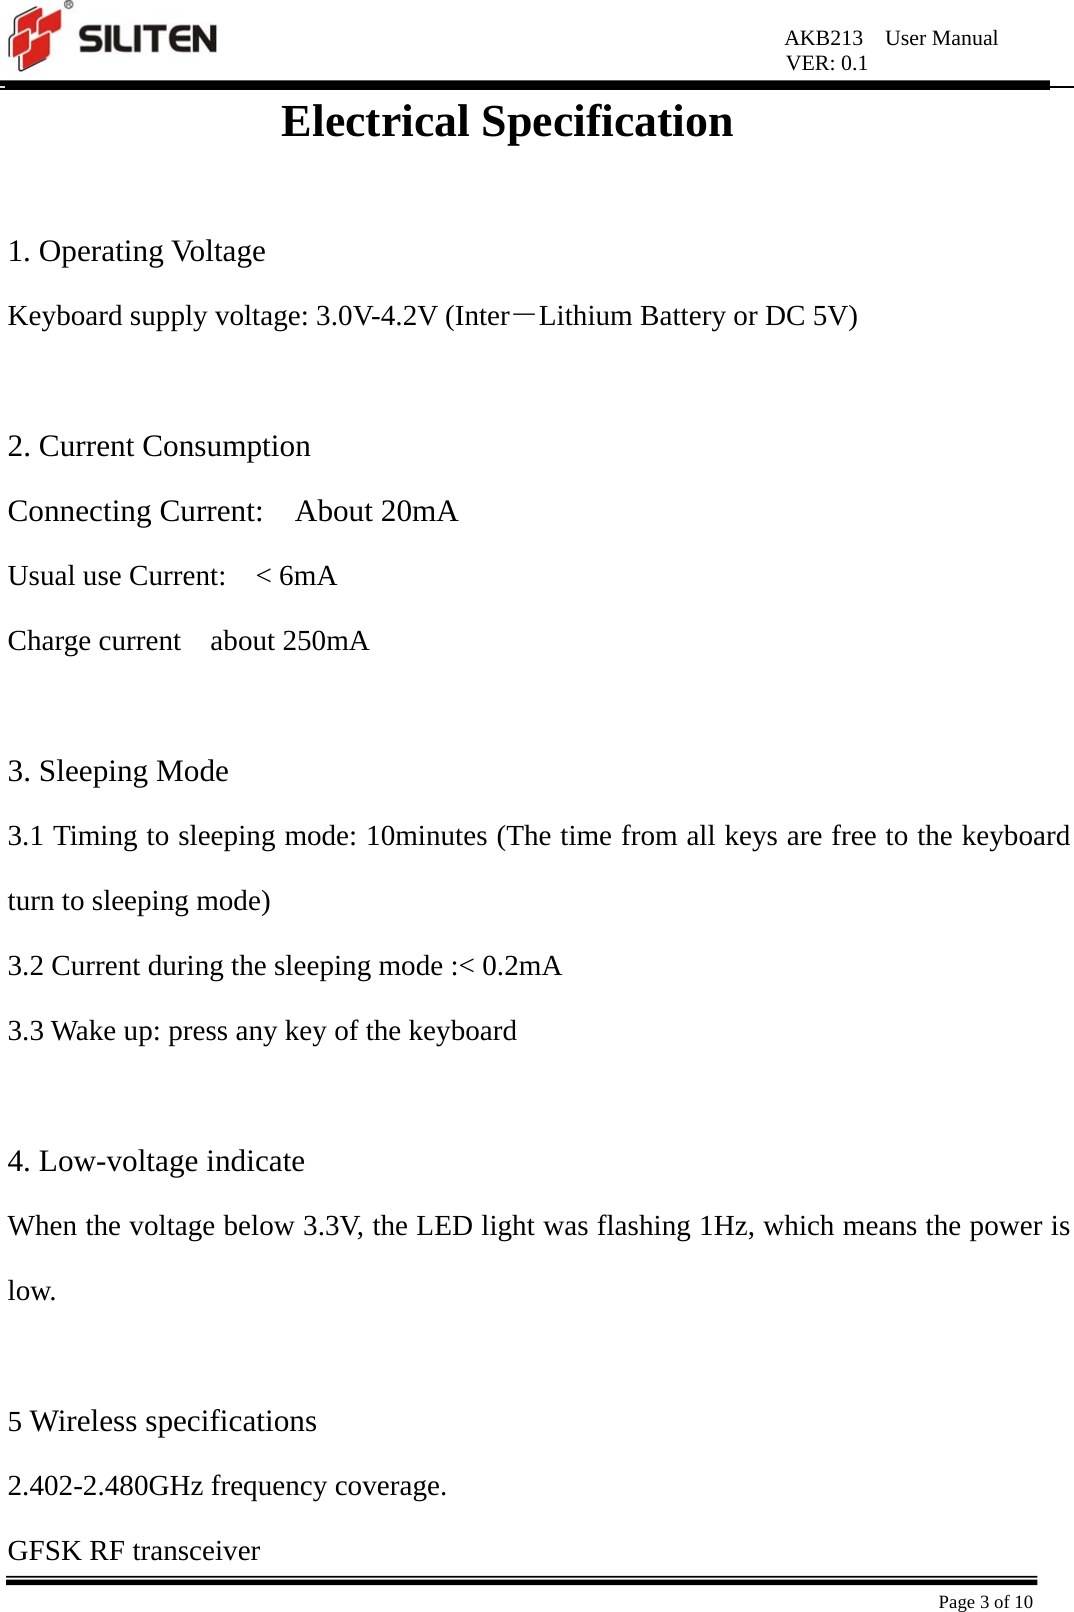 AKB213  User Manual VER: 0.1  Page 3 of 10 Electrical Specification  1. Operating Voltage Keyboard supply voltage: 3.0V-4.2V (Inter－Lithium Battery or DC 5V)  2. Current Consumption Connecting Current:  About 20mA Usual use Current:    &lt; 6mA Charge current  about 250mA   3. Sleeping Mode 3.1 Timing to sleeping mode: 10minutes (The time from all keys are free to the keyboard turn to sleeping mode) 3.2 Current during the sleeping mode :&lt; 0.2mA   3.3 Wake up: press any key of the keyboard  4. Low-voltage indicate When the voltage below 3.3V, the LED light was flashing 1Hz, which means the power is low.   5 Wireless specifications 2.402-2.480GHz frequency coverage. GFSK RF transceiver 